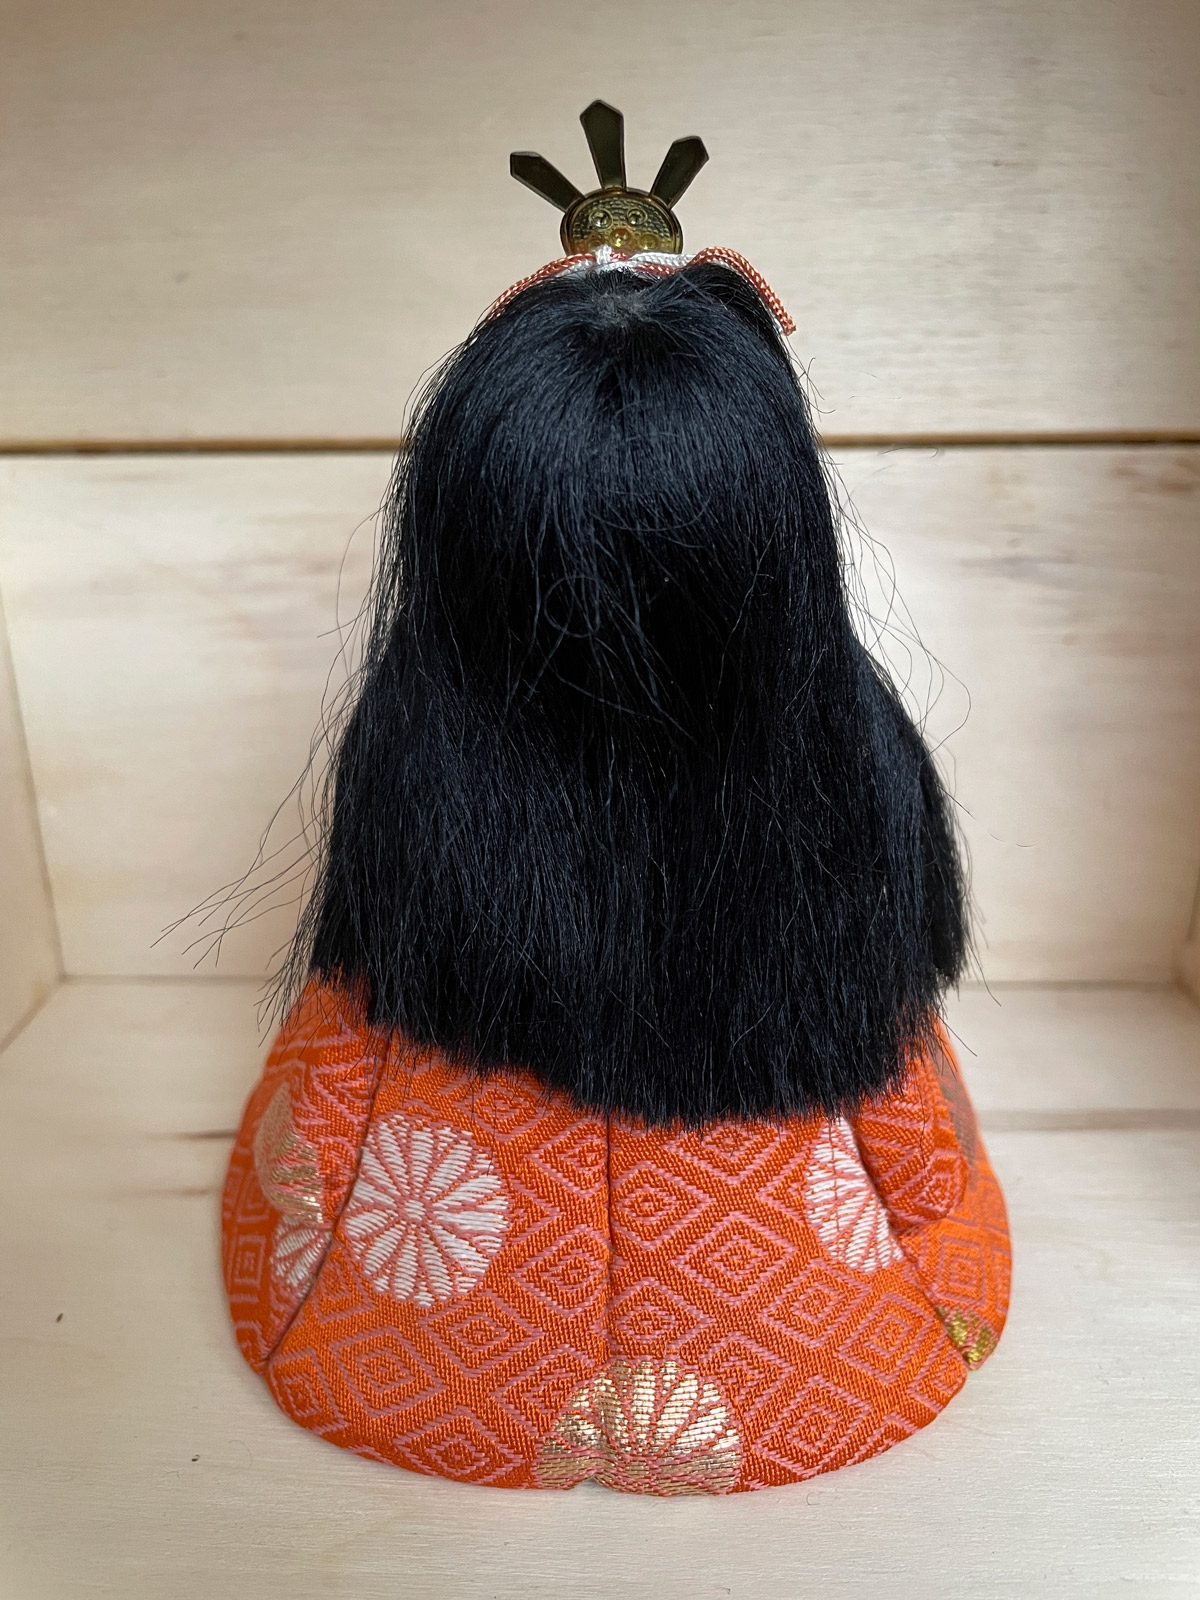 Vintage Hina doll – lady in waiting